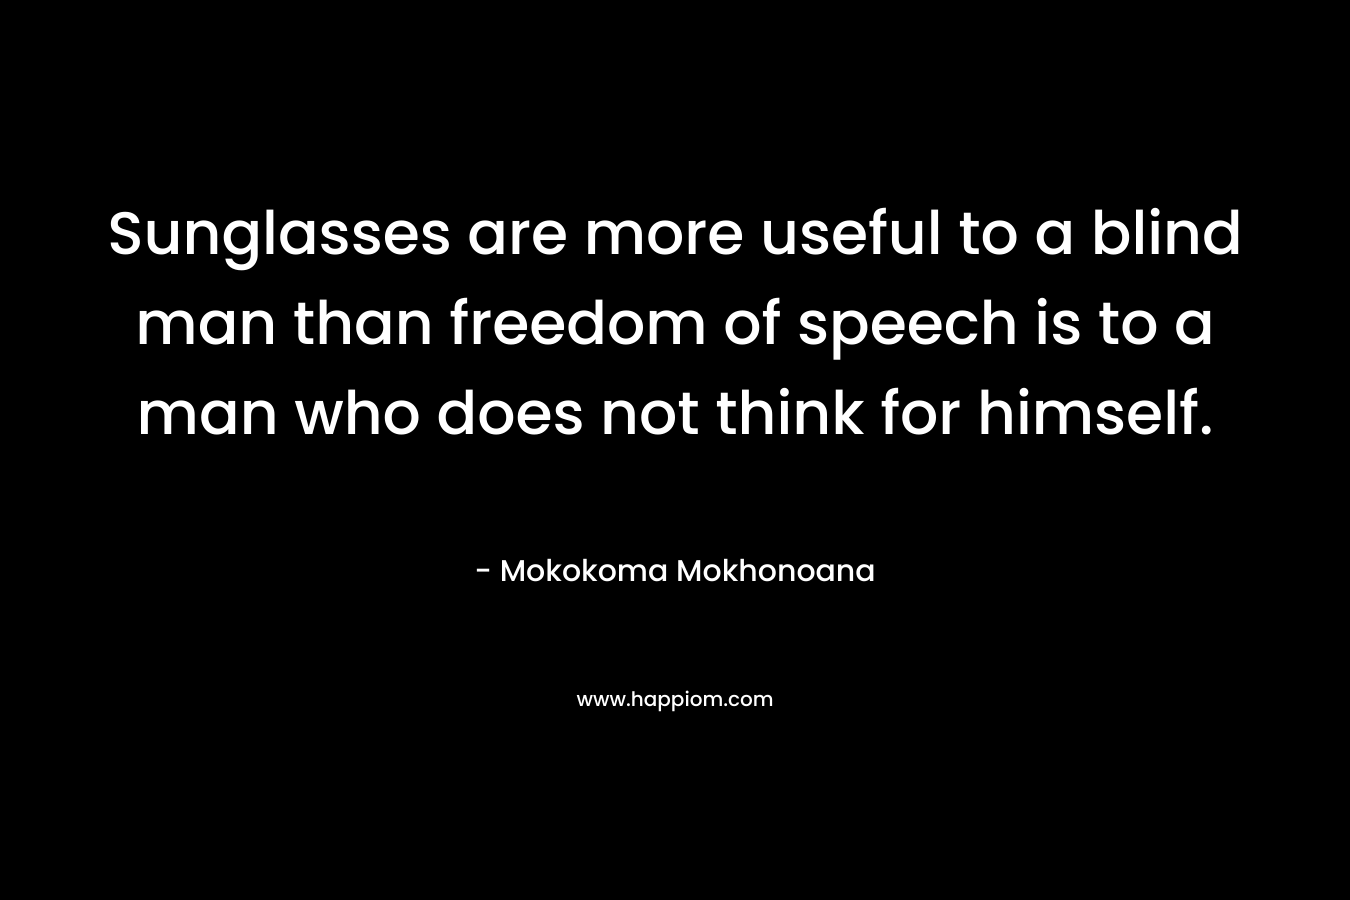 Sunglasses are more useful to a blind man than freedom of speech is to a man who does not think for himself. – Mokokoma Mokhonoana